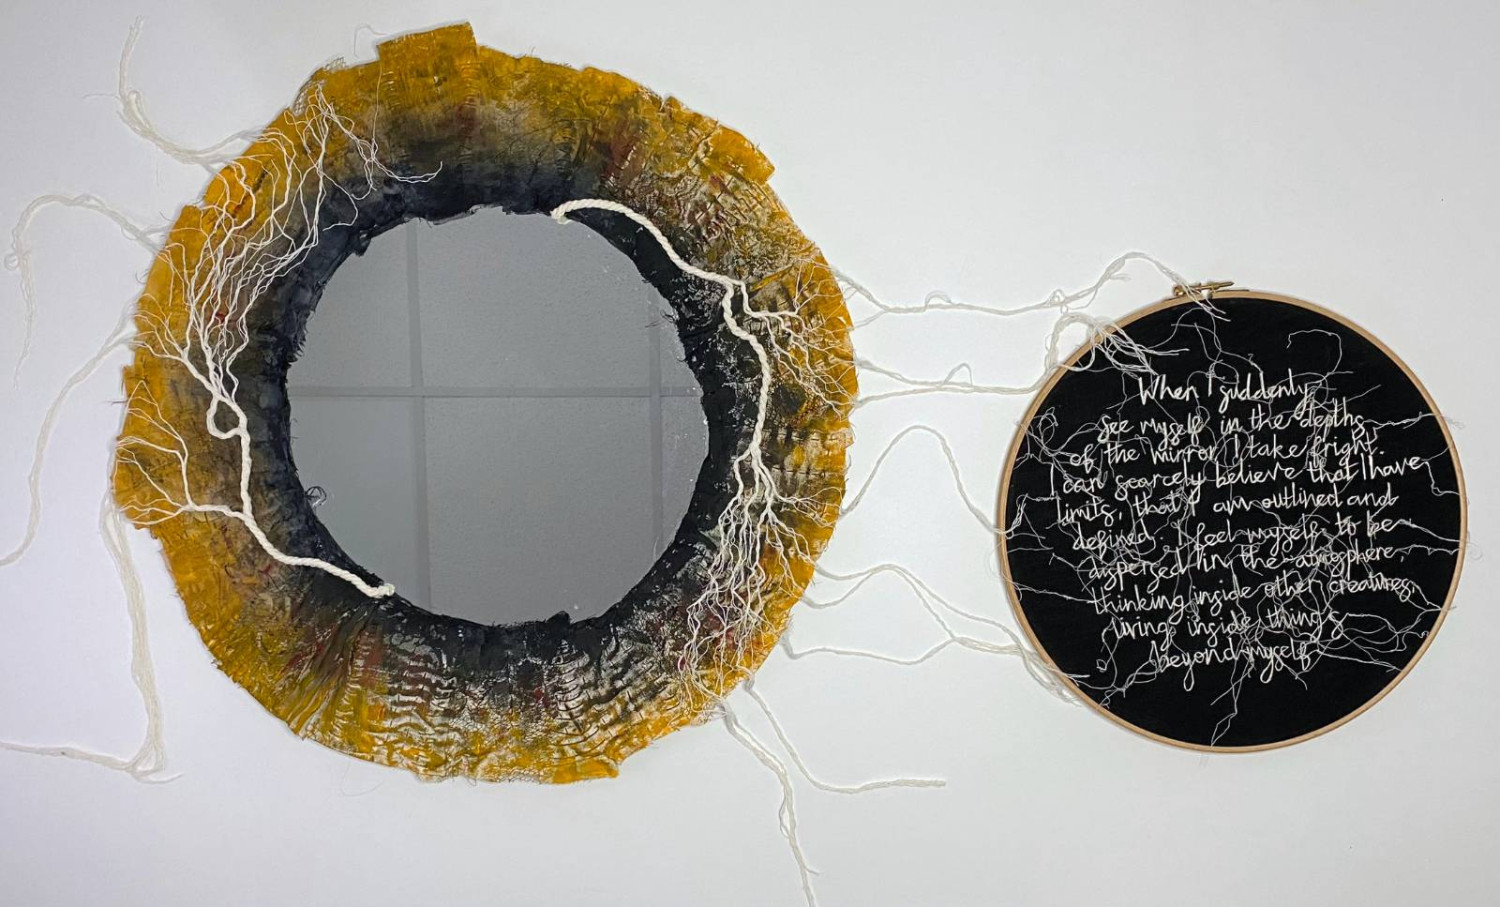 *Underland – Eye contact*, mixed media textile and glass sculpture, deconstructed, repurposed fabrics, second-hand mirror, couched recycled rope thread, acrylics, embroidered text on linen, mounted in wooden embroidery hoops, 55 x 95 x 3cm